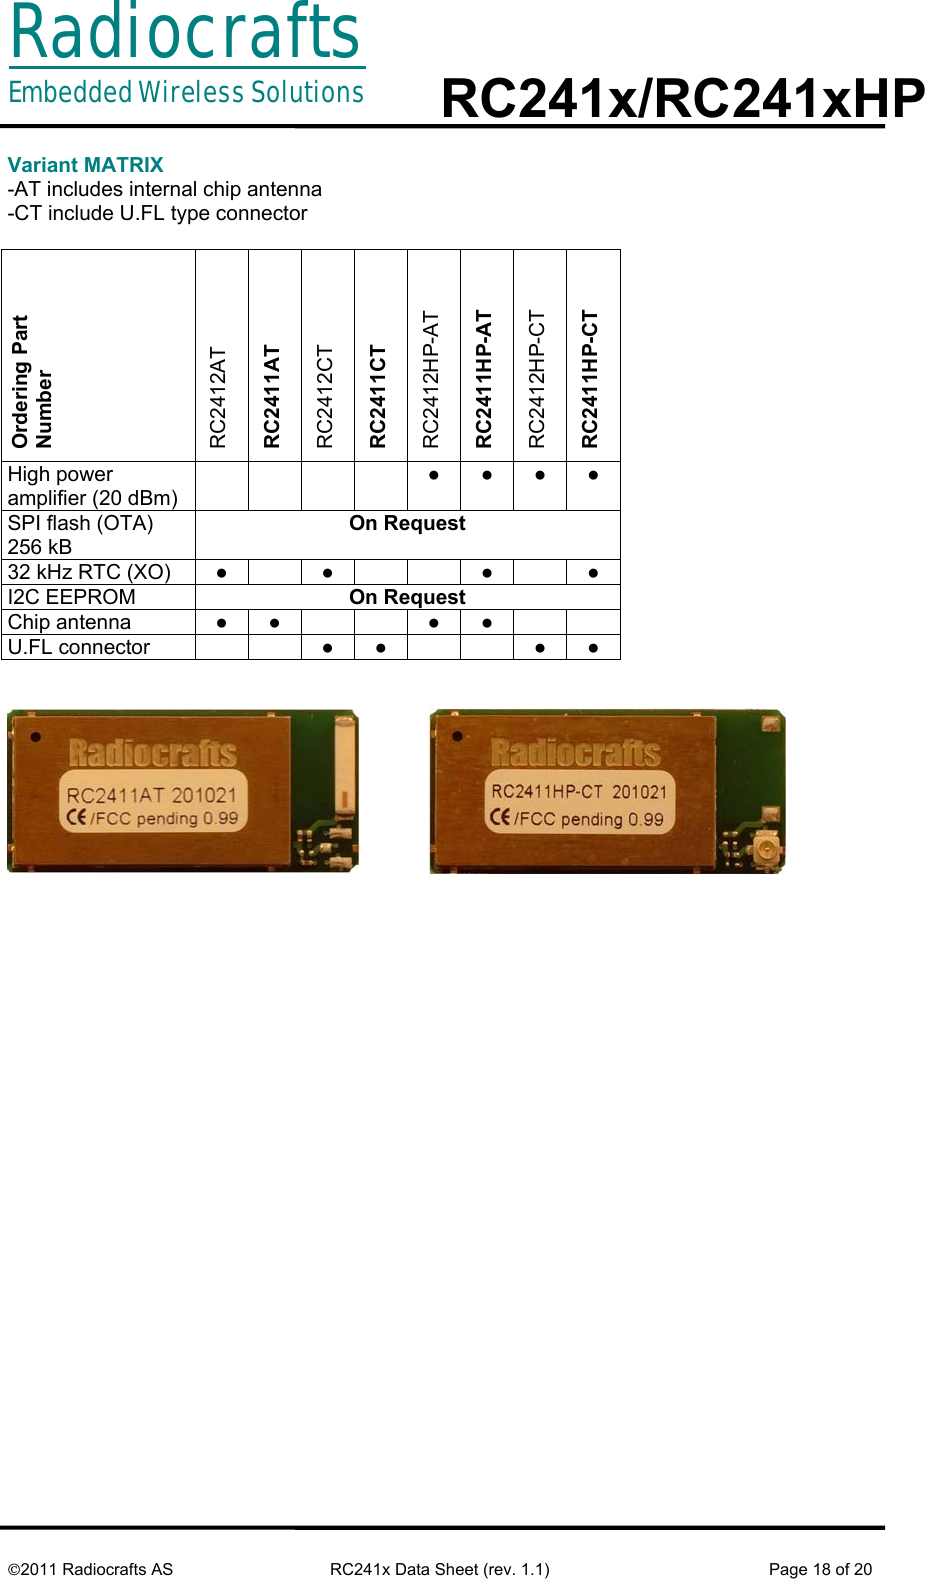 RadiocraftsEmbedded Wireless Solutions  RC241x/RC241xHP     ©2011 Radiocrafts AS  RC241x Data Sheet (rev. 1.1)  Page 18 of 20  Variant MATRIX -AT includes internal chip antenna -CT include U.FL type connector  Ordering Part  Number RC2412AT RC2411AT  RC2412CT RC2411CT RC2412HP-AT RC2411HP-AT RC2412HP-CT RC2411HP-CT High power amplifier (20 dBm)     ● ● ● ● SPI flash (OTA) 256 kB On Request 32 kHz RTC (XO)  ●  ●   ●  ● I2C EEPROM   On Request Chip antenna  ● ●   ● ●   U.FL connector     ● ●   ● ●                    